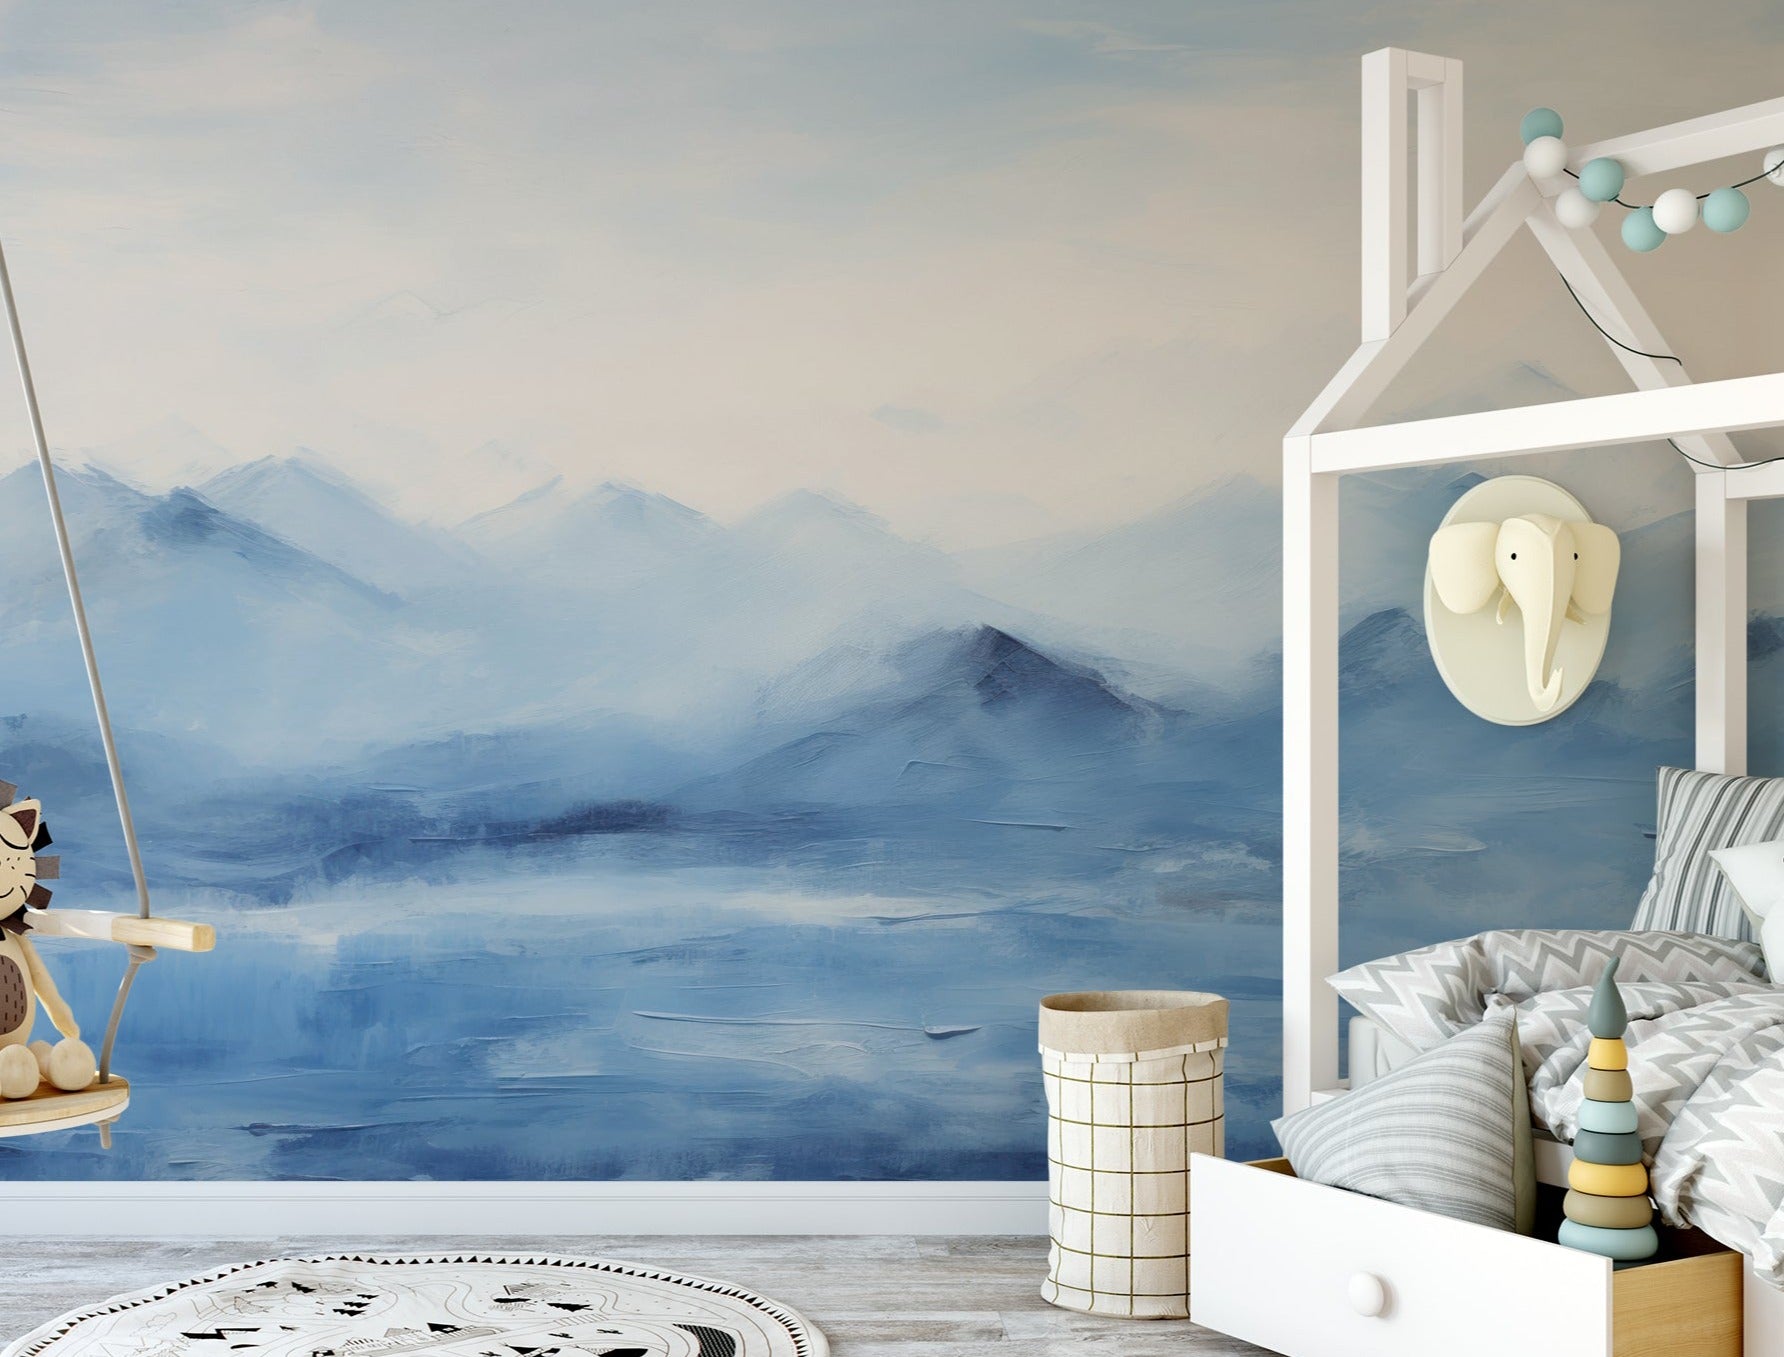 New South Wales Mountains Mural in a child's room setup with modern furniture and playful decor."